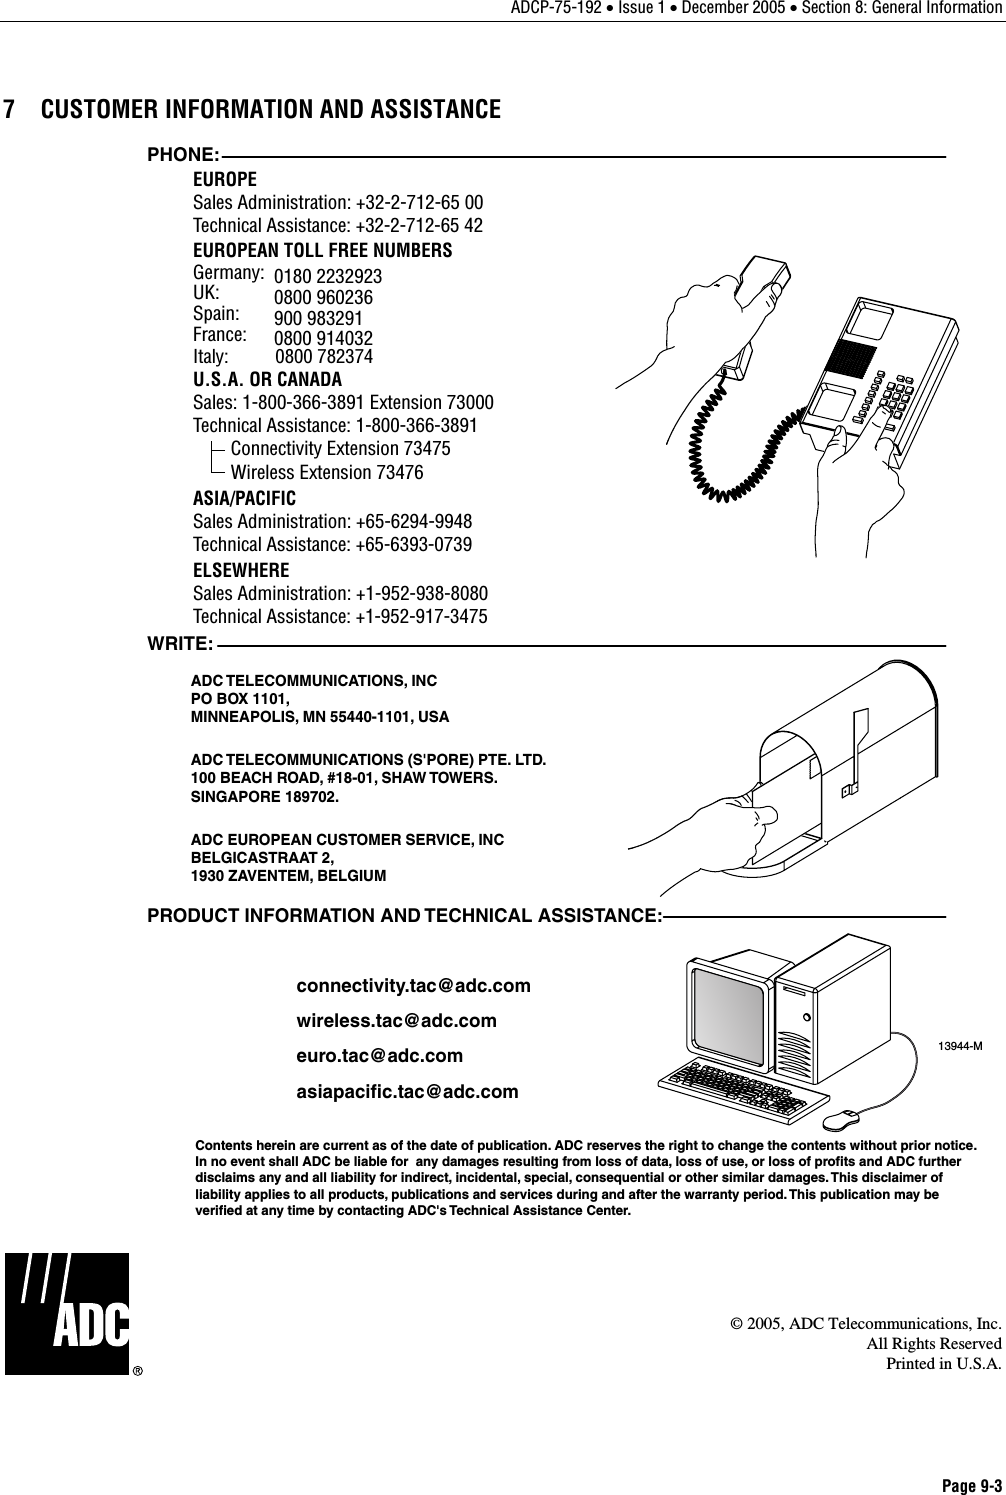 ADCP-75-192 • Issue 1 • December 2005 • Section 8: General Information Page 9-3  7  CUSTOMER INFORMATION AND ASSISTANCE 13944-MWRITE:ADC TELECOMMUNICATIONS, INCPO BOX 1101,MINNEAPOLIS, MN 55440-1101, USAADC TELECOMMUNICATIONS (S&apos;PORE) PTE. LTD.100 BEACH ROAD, #18-01, SHAW TOWERS.SINGAPORE 189702.ADC EUROPEAN CUSTOMER SERVICE, INCBELGICASTRAAT 2,1930 ZAVENTEM, BELGIUMPHONE:EUROPESales Administration: +32-2-712-65 00Technical Assistance: +32-2-712-65 42EUROPEAN TOLL FREE NUMBERSUK: 0800 960236Spain: 900 983291France: 0800 914032Germany: 0180 2232923U.S.A. OR CANADASales: 1-800-366-3891 Extension 73000Technical Assistance: 1-800-366-3891        Connectivity Extension 73475        Wireless Extension 73476ASIA/PACIFICSales Administration: +65-6294-9948Technical Assistance: +65-6393-0739ELSEWHERESales Administration: +1-952-938-8080Technical Assistance: +1-952-917-3475Italy:          0800 782374PRODUCT INFORMATION AND TECHNICAL ASSISTANCE:Contents herein are current as of the date of publication. ADC reserves the right to change the contents without prior notice.In no event shall ADC be liable for  any damages resulting from loss of data, loss of use, or loss of profits and ADC furtherdisclaims any and all liability for indirect, incidental, special, consequential or other similar damages. This disclaimer ofliability applies to all products, publications and services during and after the warranty period. This publication may beverified at any time by contacting ADC&apos;s Technical Assistance Center. euro.tac@adc.comasiapacific.tac@adc.comwireless.tac@adc.comconnectivity.tac@adc.com  © 2005, ADC Telecommunications, Inc.All Rights ReservedPrinted in U.S.A. 